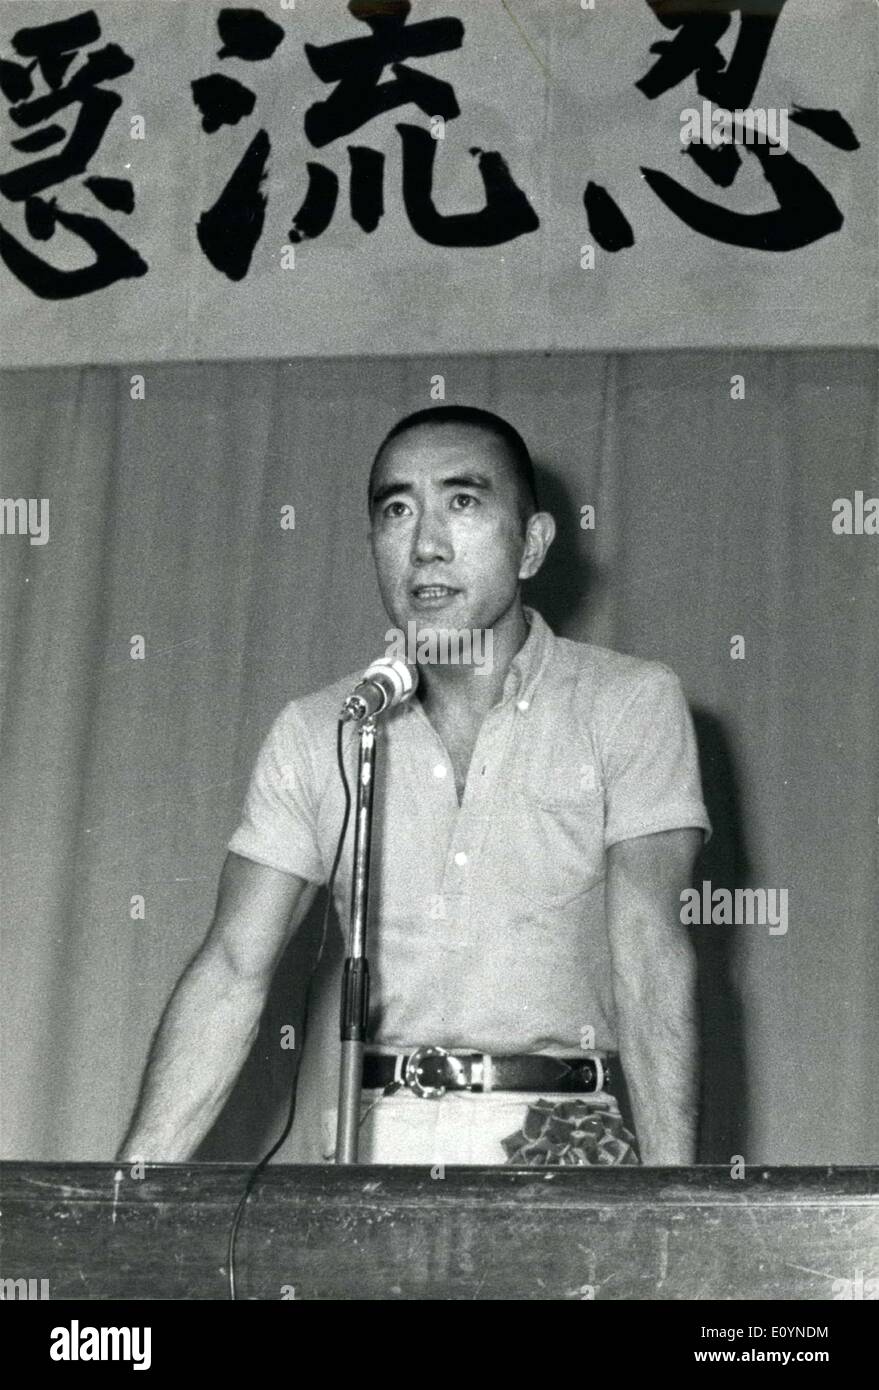 Nov. 30, 1970 - Coup D'Etatet in Tokto Fails Author commits Hara Kiri : Yukio Mishima, well - known author and once mentioned as a possible Nobel prize winner, attempted to stir up members of the 32nd infantry Regiment stationed at Ichigaya, Tokyo in the hope of staging a coup d'etat, and join his ''Tate no Kai'' (Association of Shields). He appealed to the men of the Japan Self-Defence forces to risre up and change the Constitution, so that they would be the power in Japan around the Emperor Stock Photo